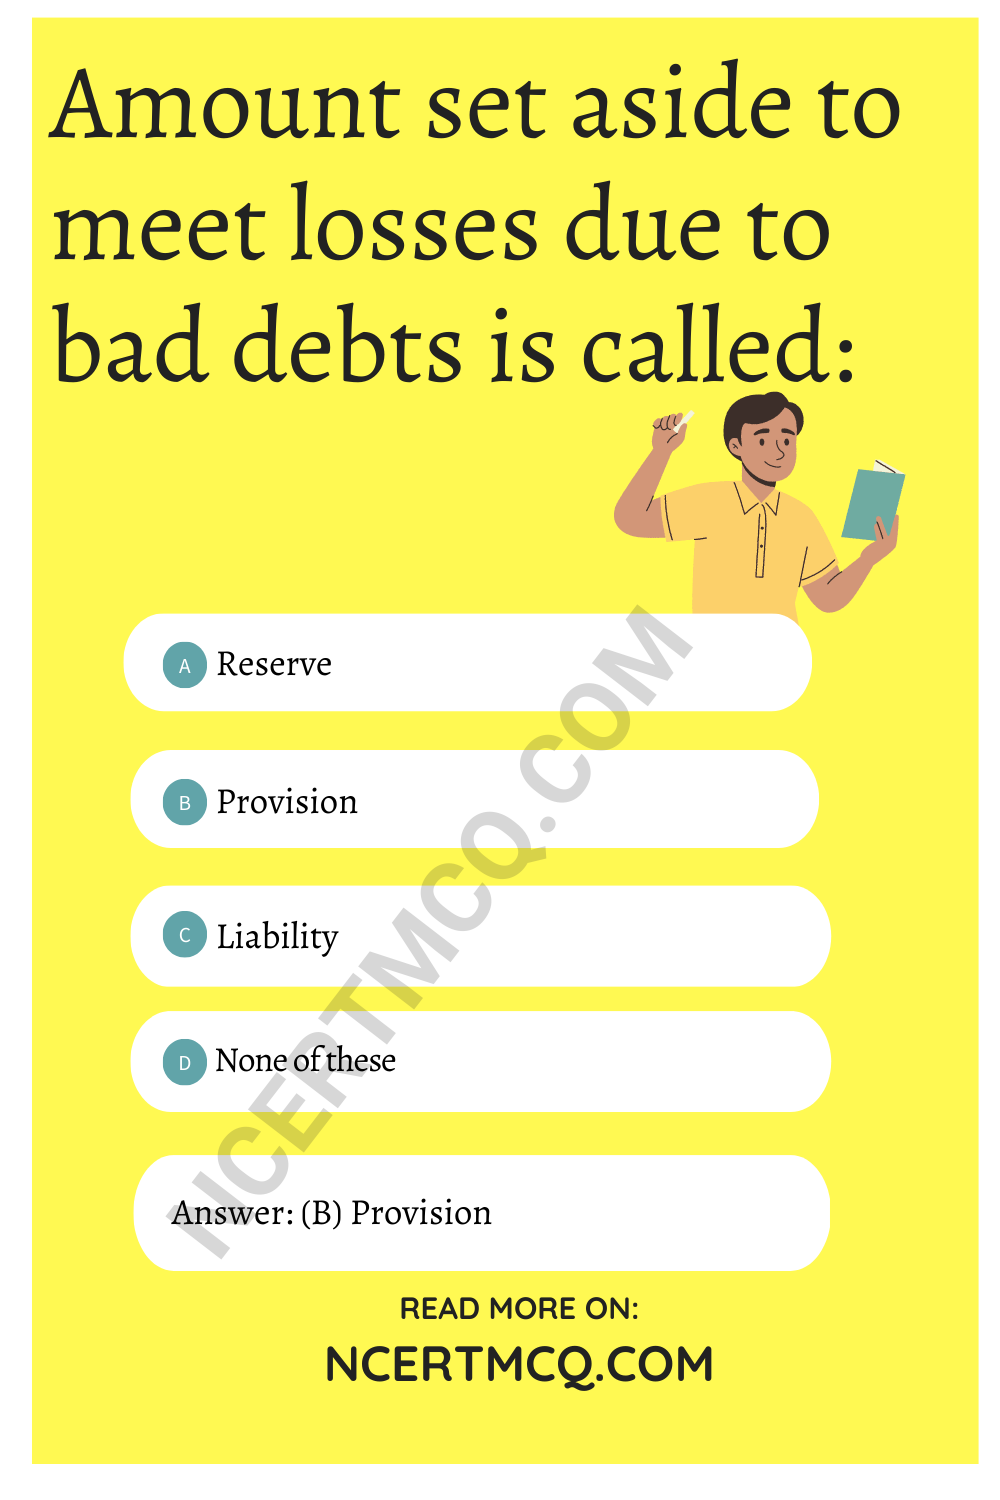 Amount set aside to meet losses due to bad debts is called: